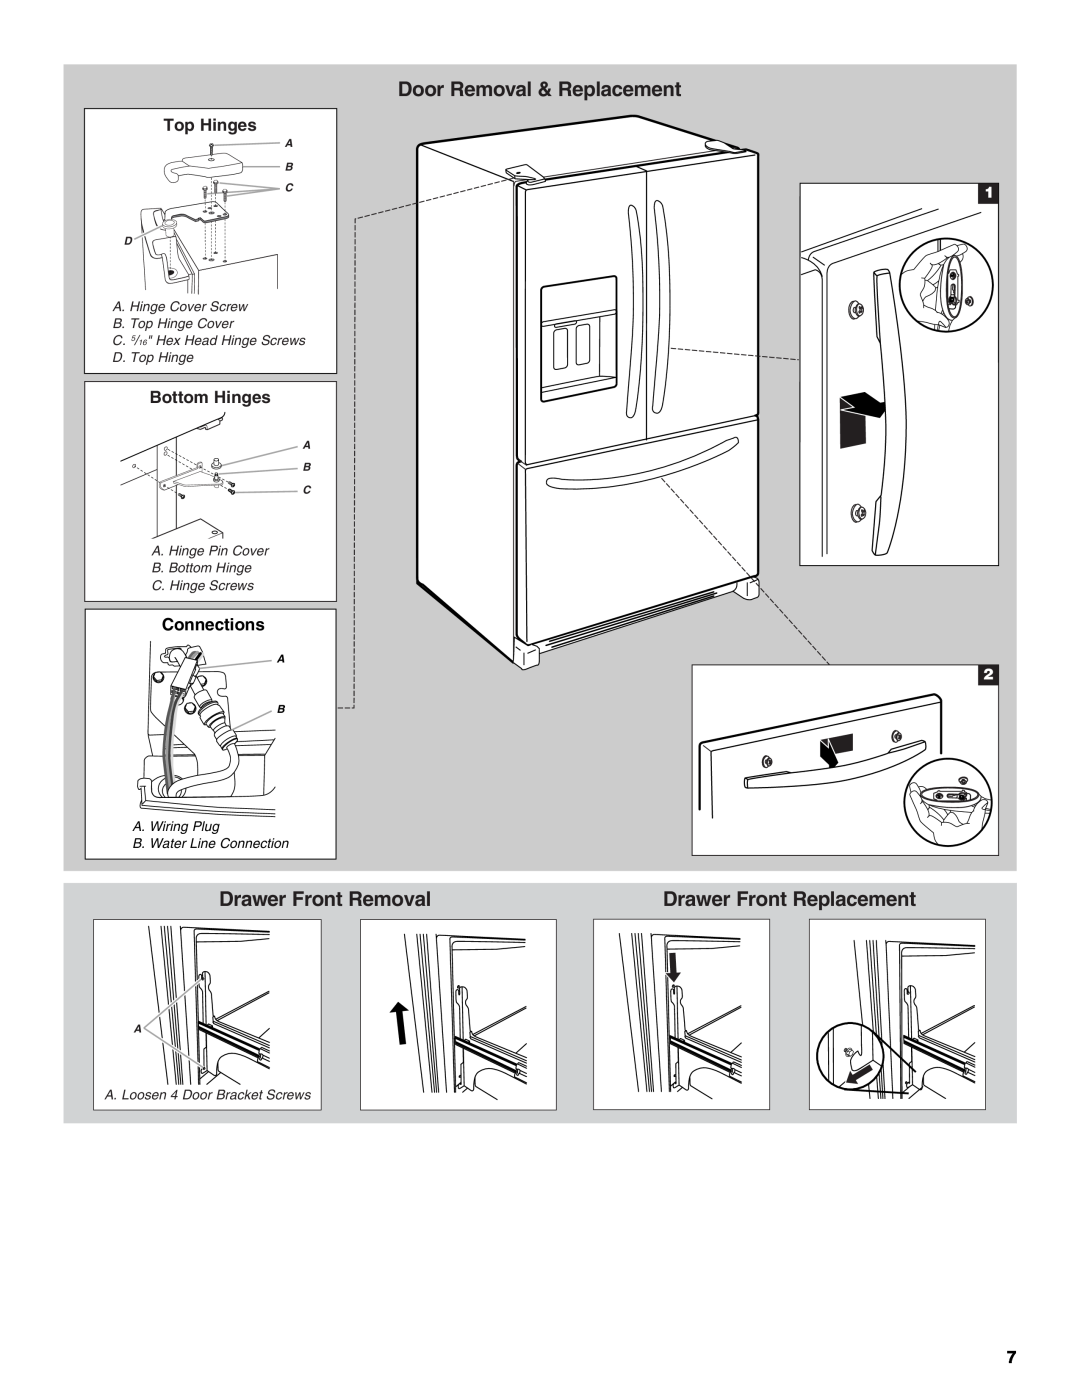 Whirlpool W10314956B Door Removal & Replacement, Drawer Front Removal, Drawer Front Replacement, Top Hinges, Bottom Hinges 